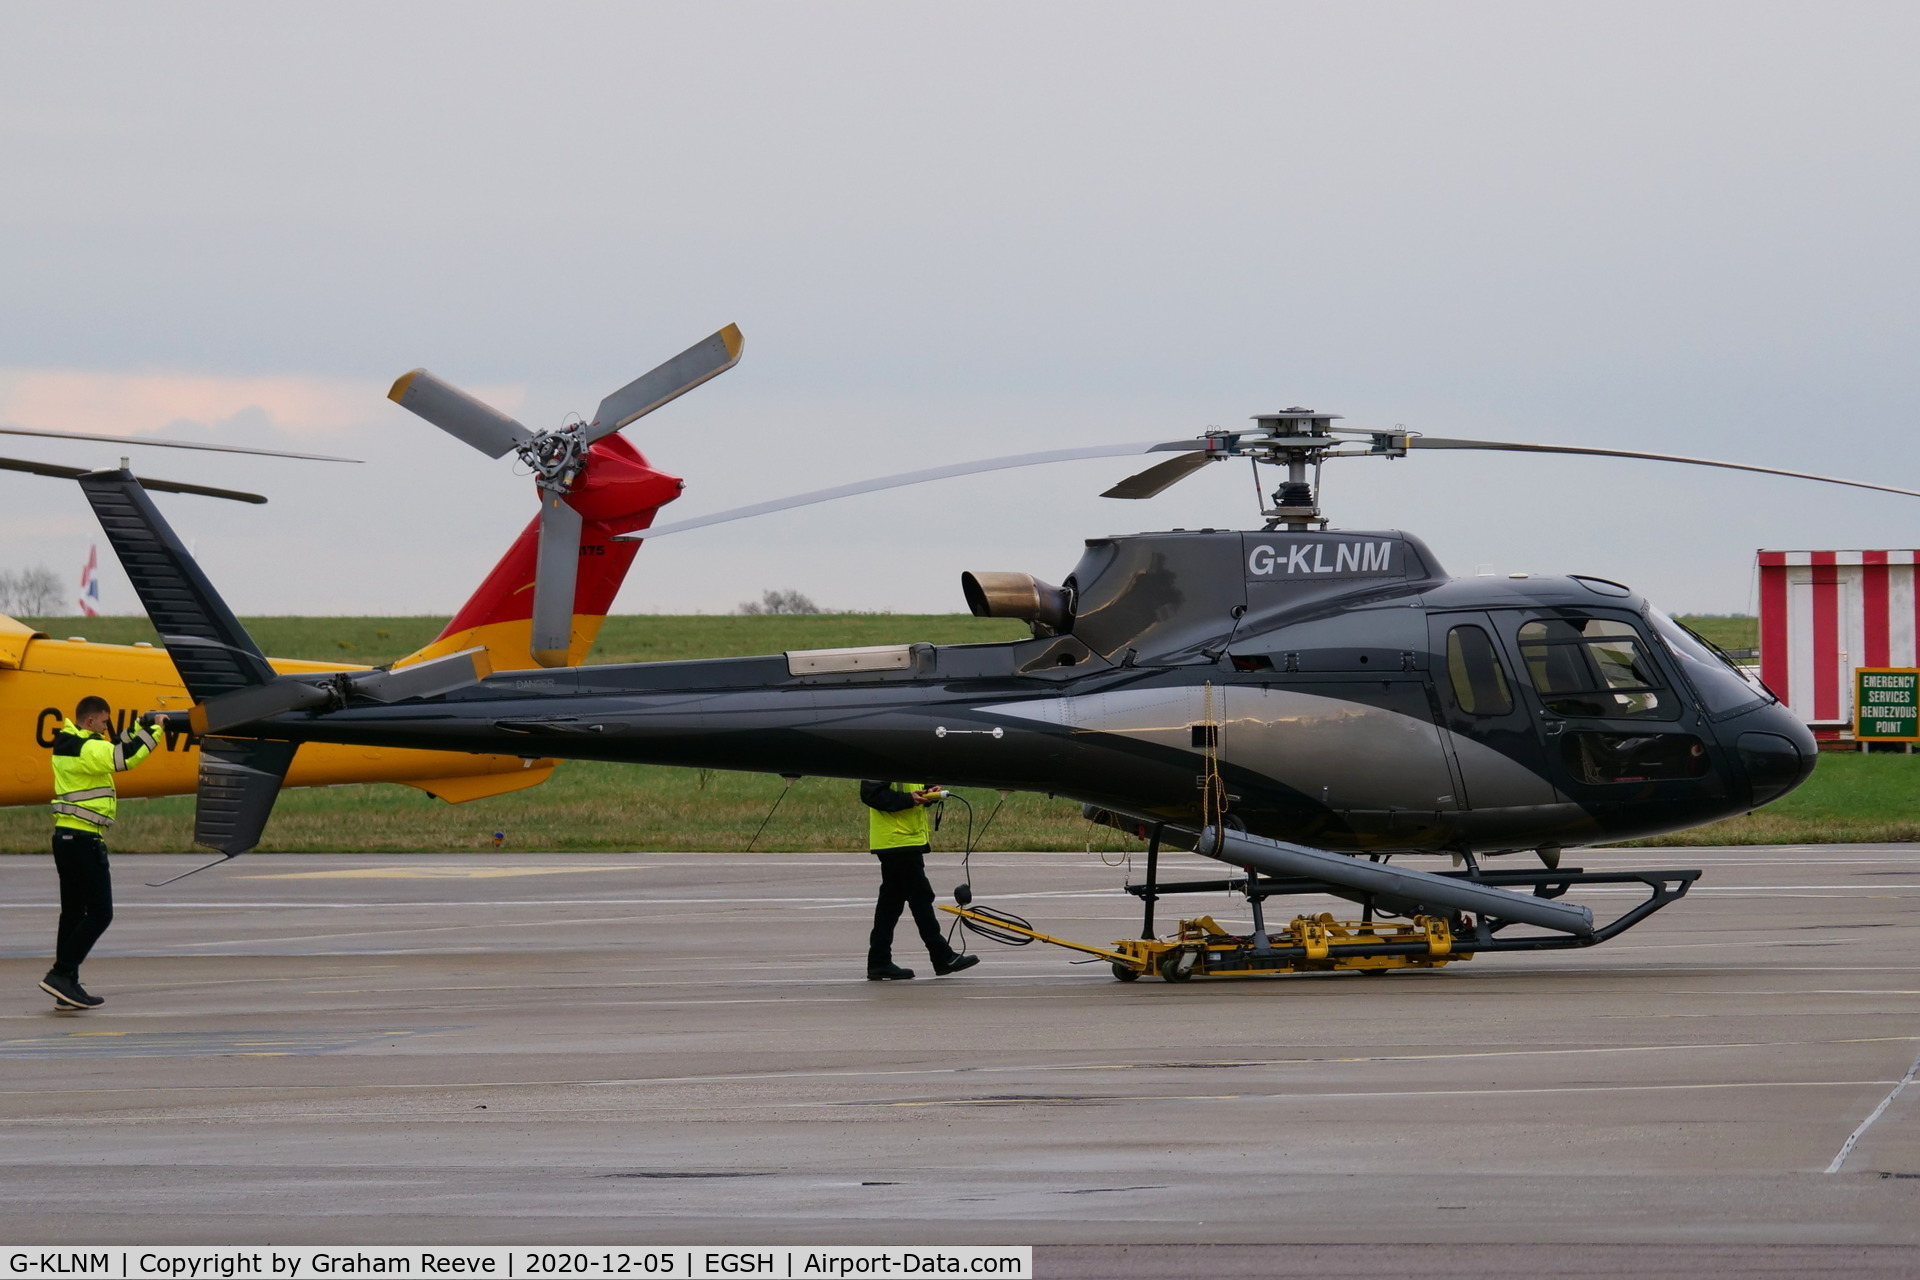 G-KLNM, 2014 Eurocopter AS-350B-3 Ecureuil Ecureuil C/N 7827, Being pulled out of the hangar.